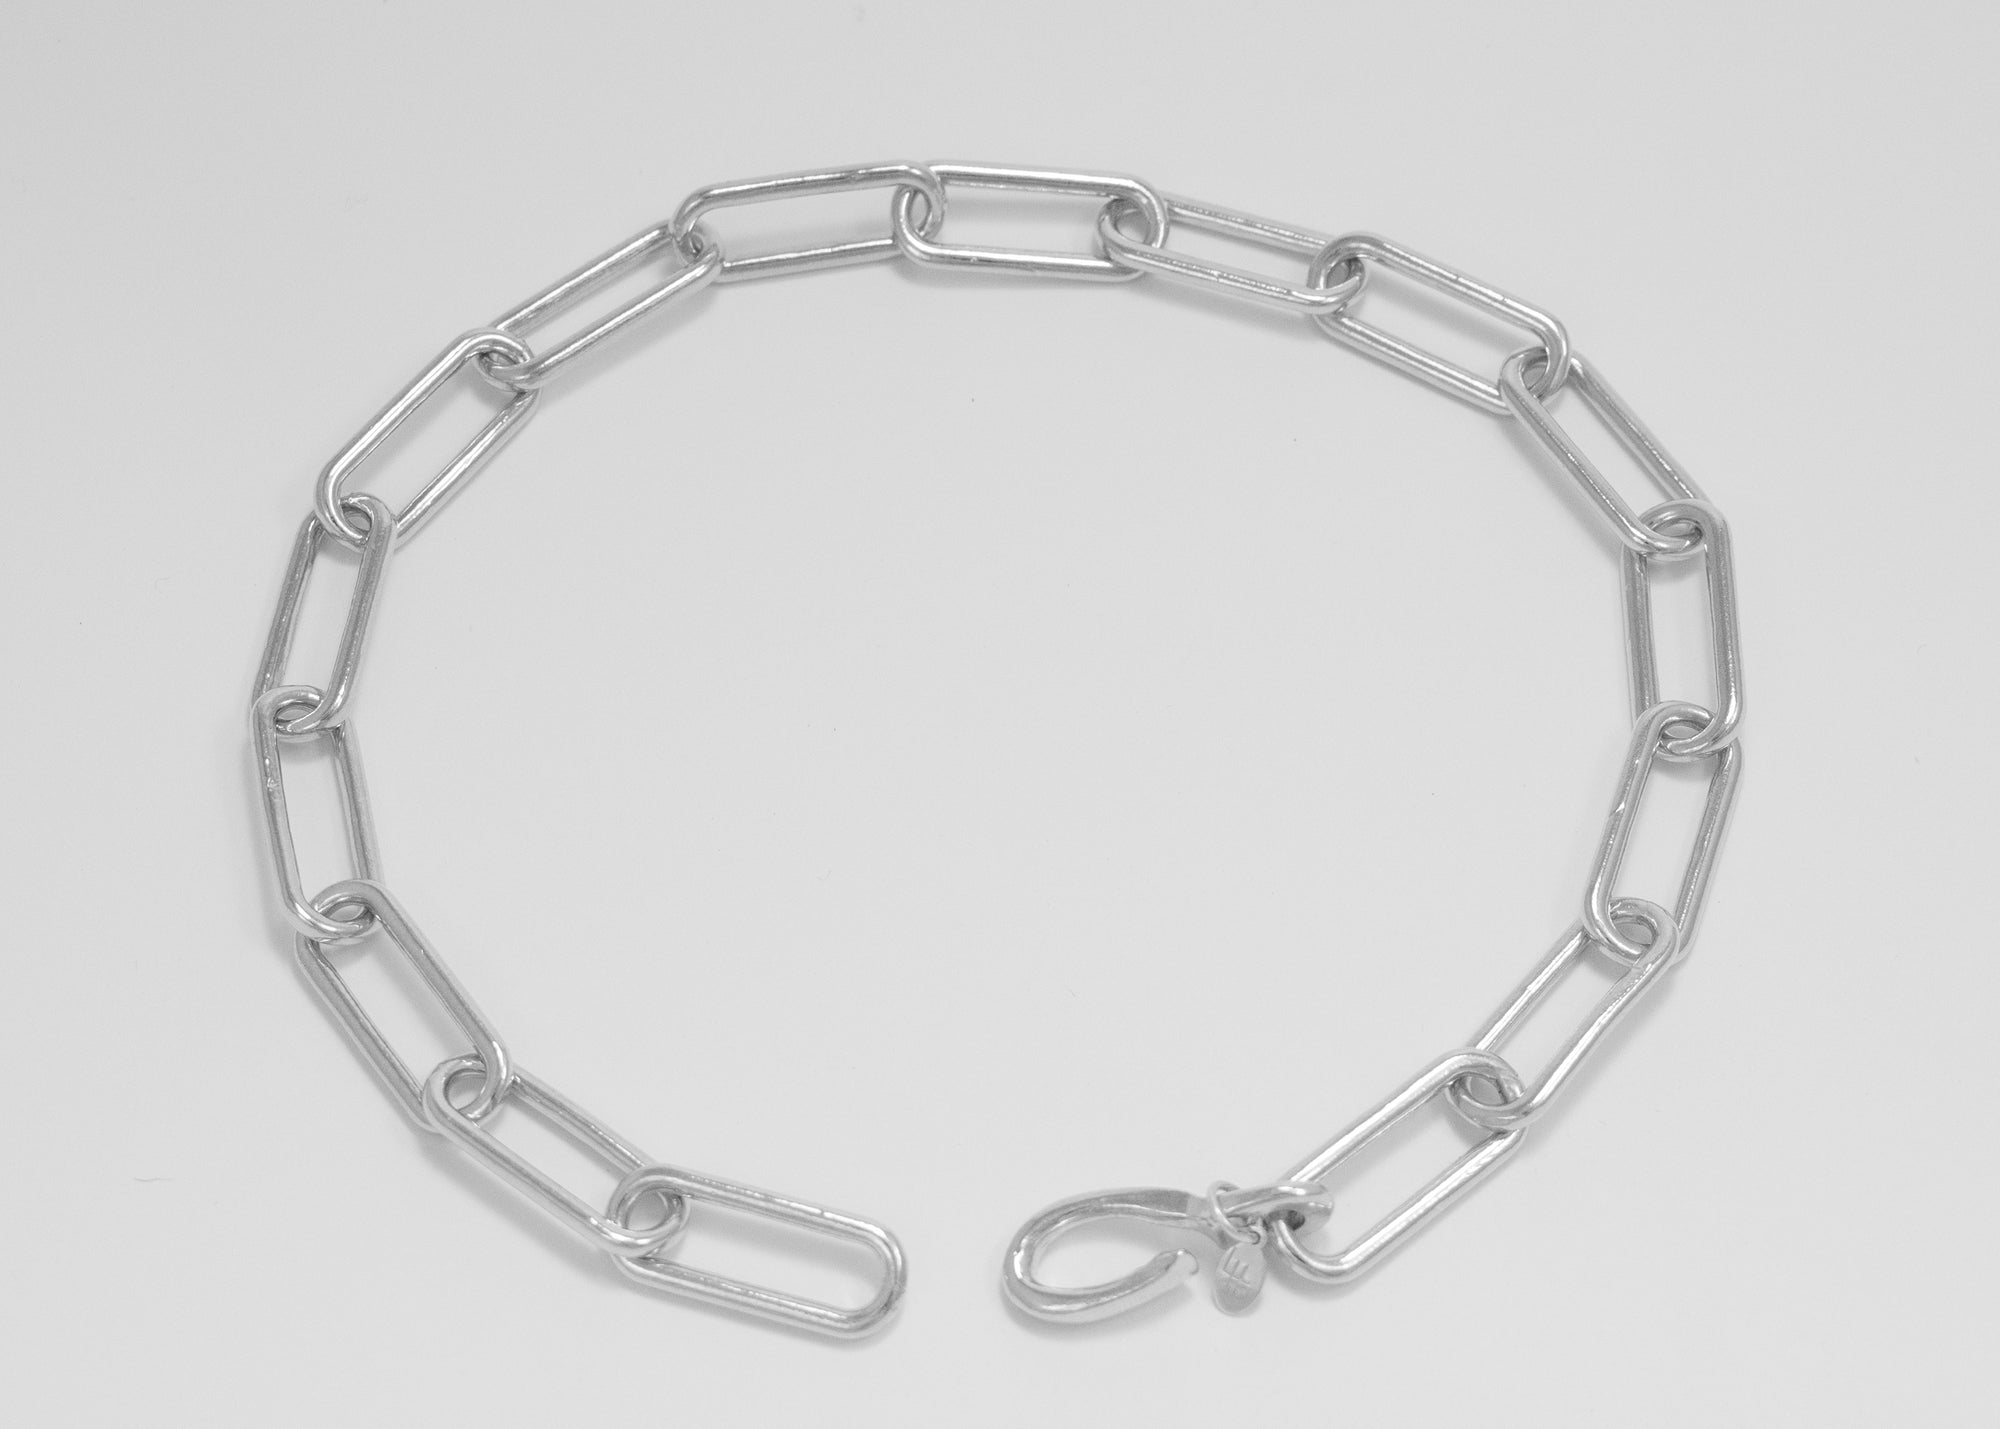 An image of the new Eliza Chain Necklace with the updated sculptural hook clasp